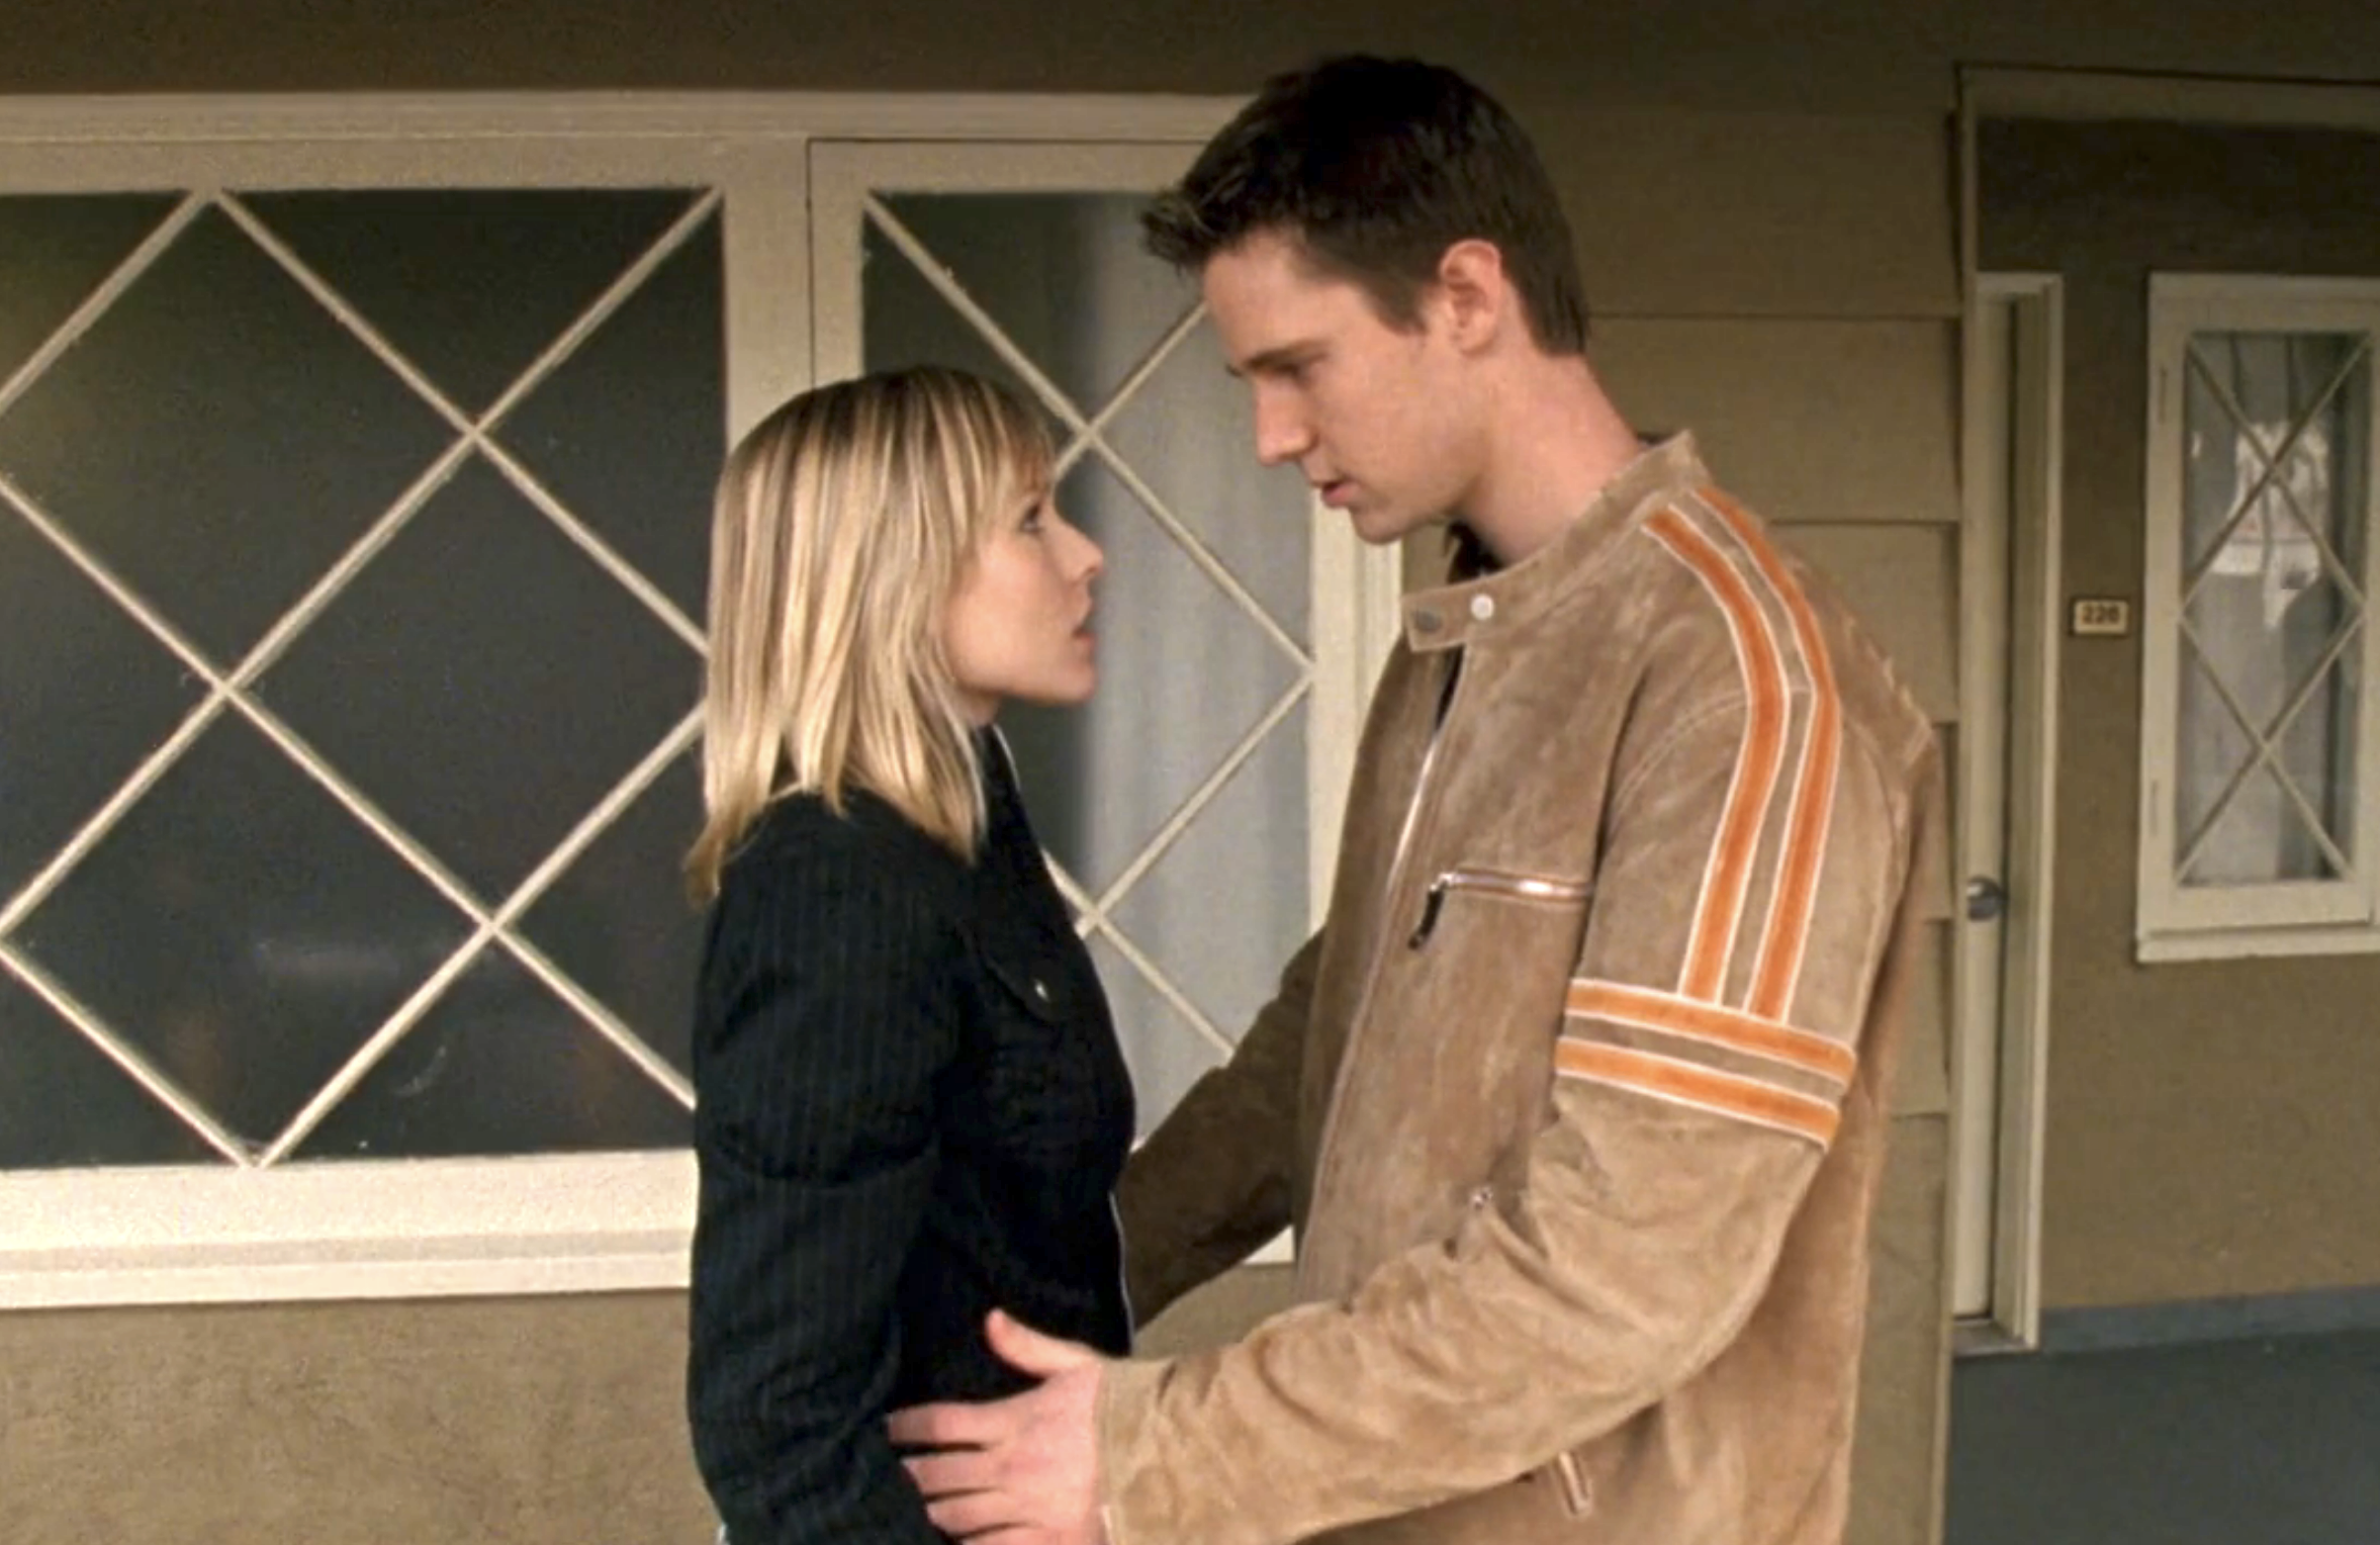 Screenshot from S1E18 of Veronica Mars. Veronica and Logan are standing on a hotel balcony looking into each other's eyes. Logan's hands are on Veronica's waist.